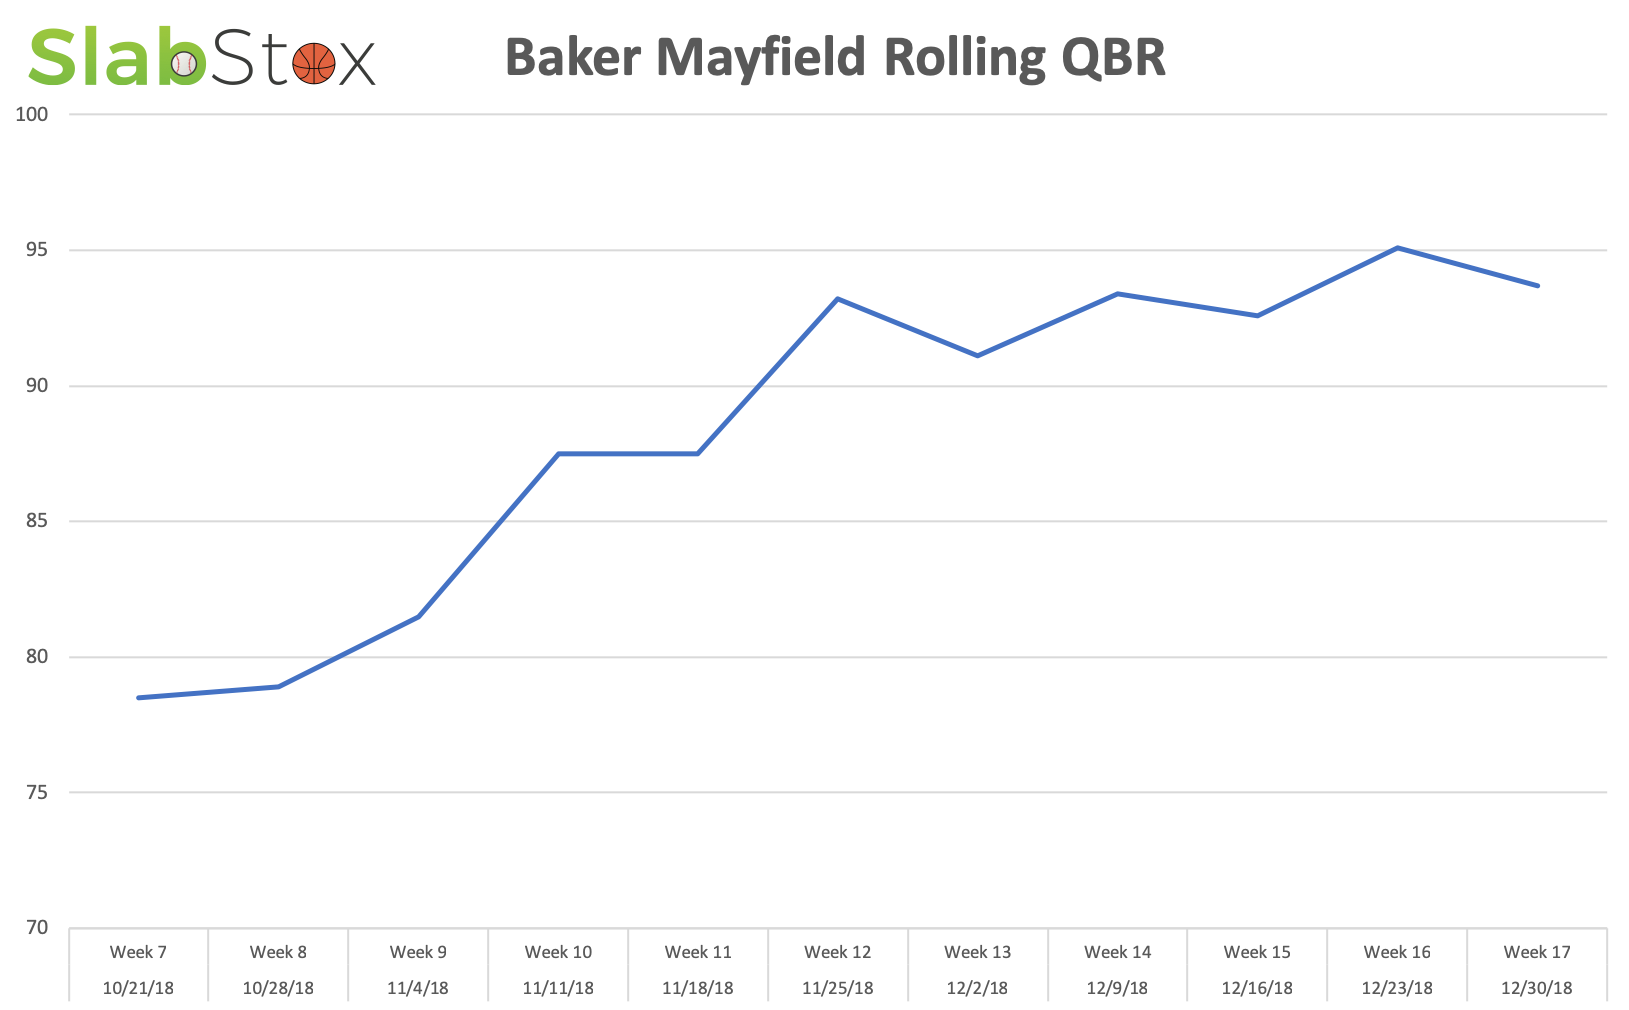 SlabStox infographic for Baker Mayfield's Rolling QBR